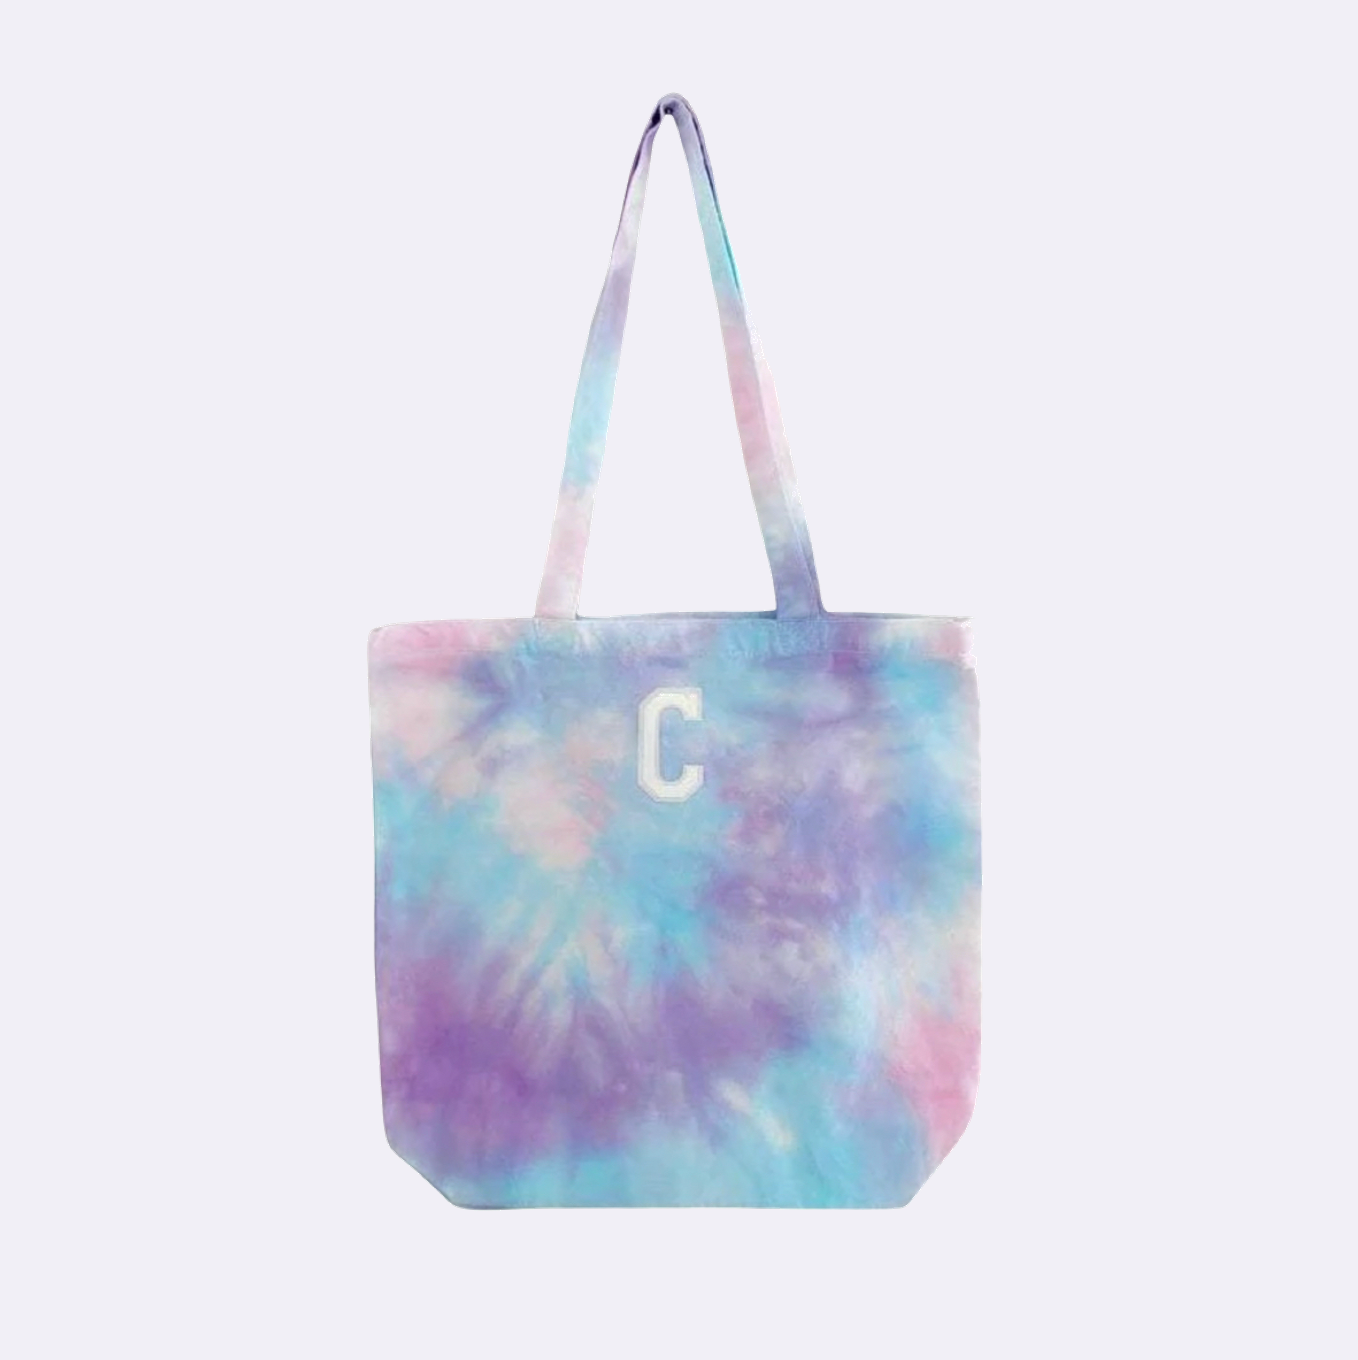 BFF INITIAL TOTE ♡ custom color + personalized initial tote